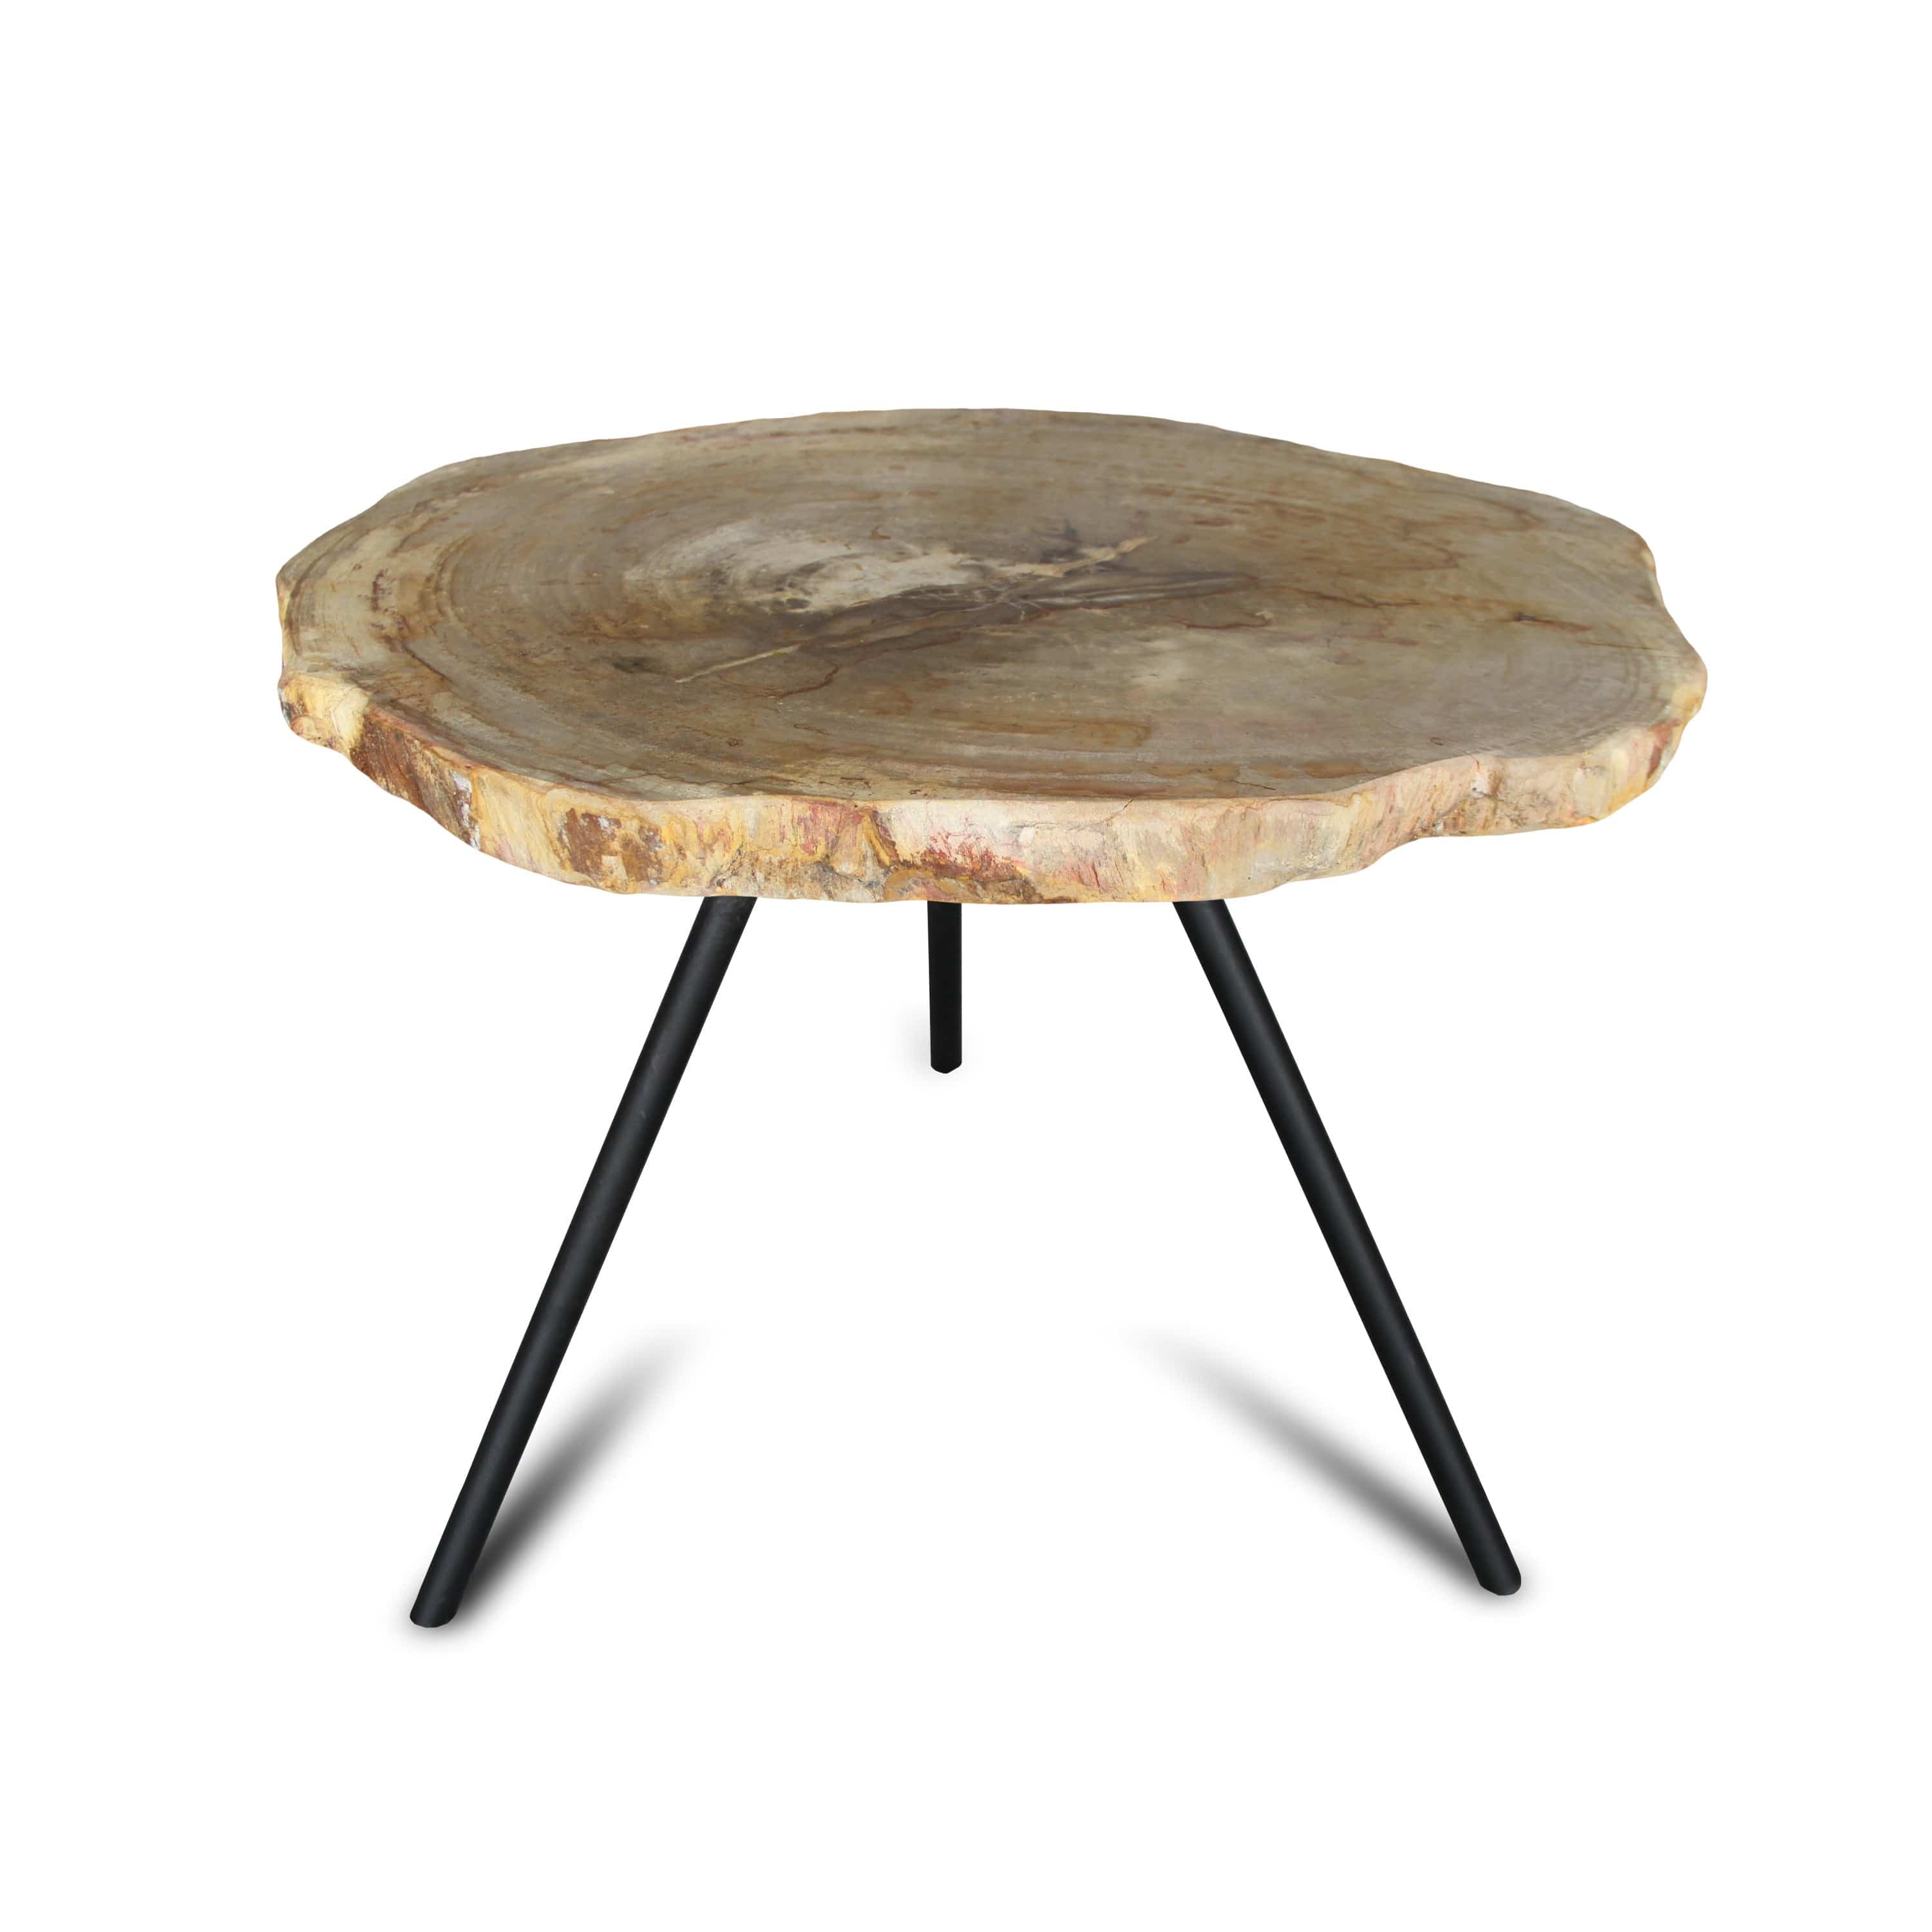 Kalifano Petrified Wood Petrified Wood Round Slice Side Table from Indonesia - 27" / 73 lbs PWT2800.002